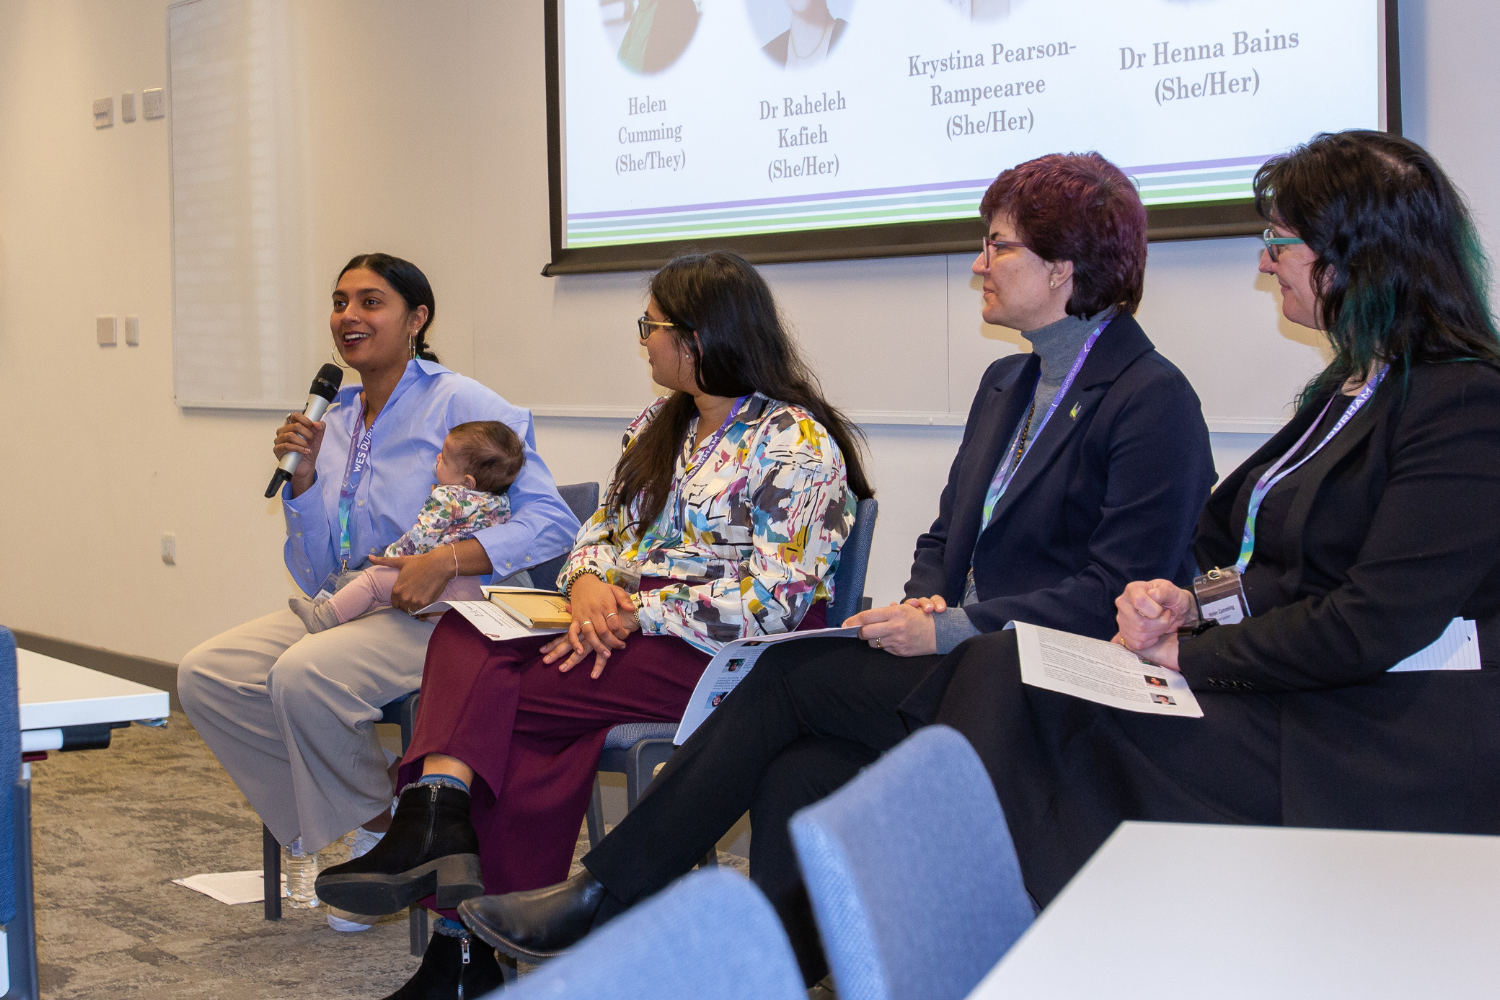 Four women in engineering, one holding microphone and cradling baby, sitting on a panel discussing engineering